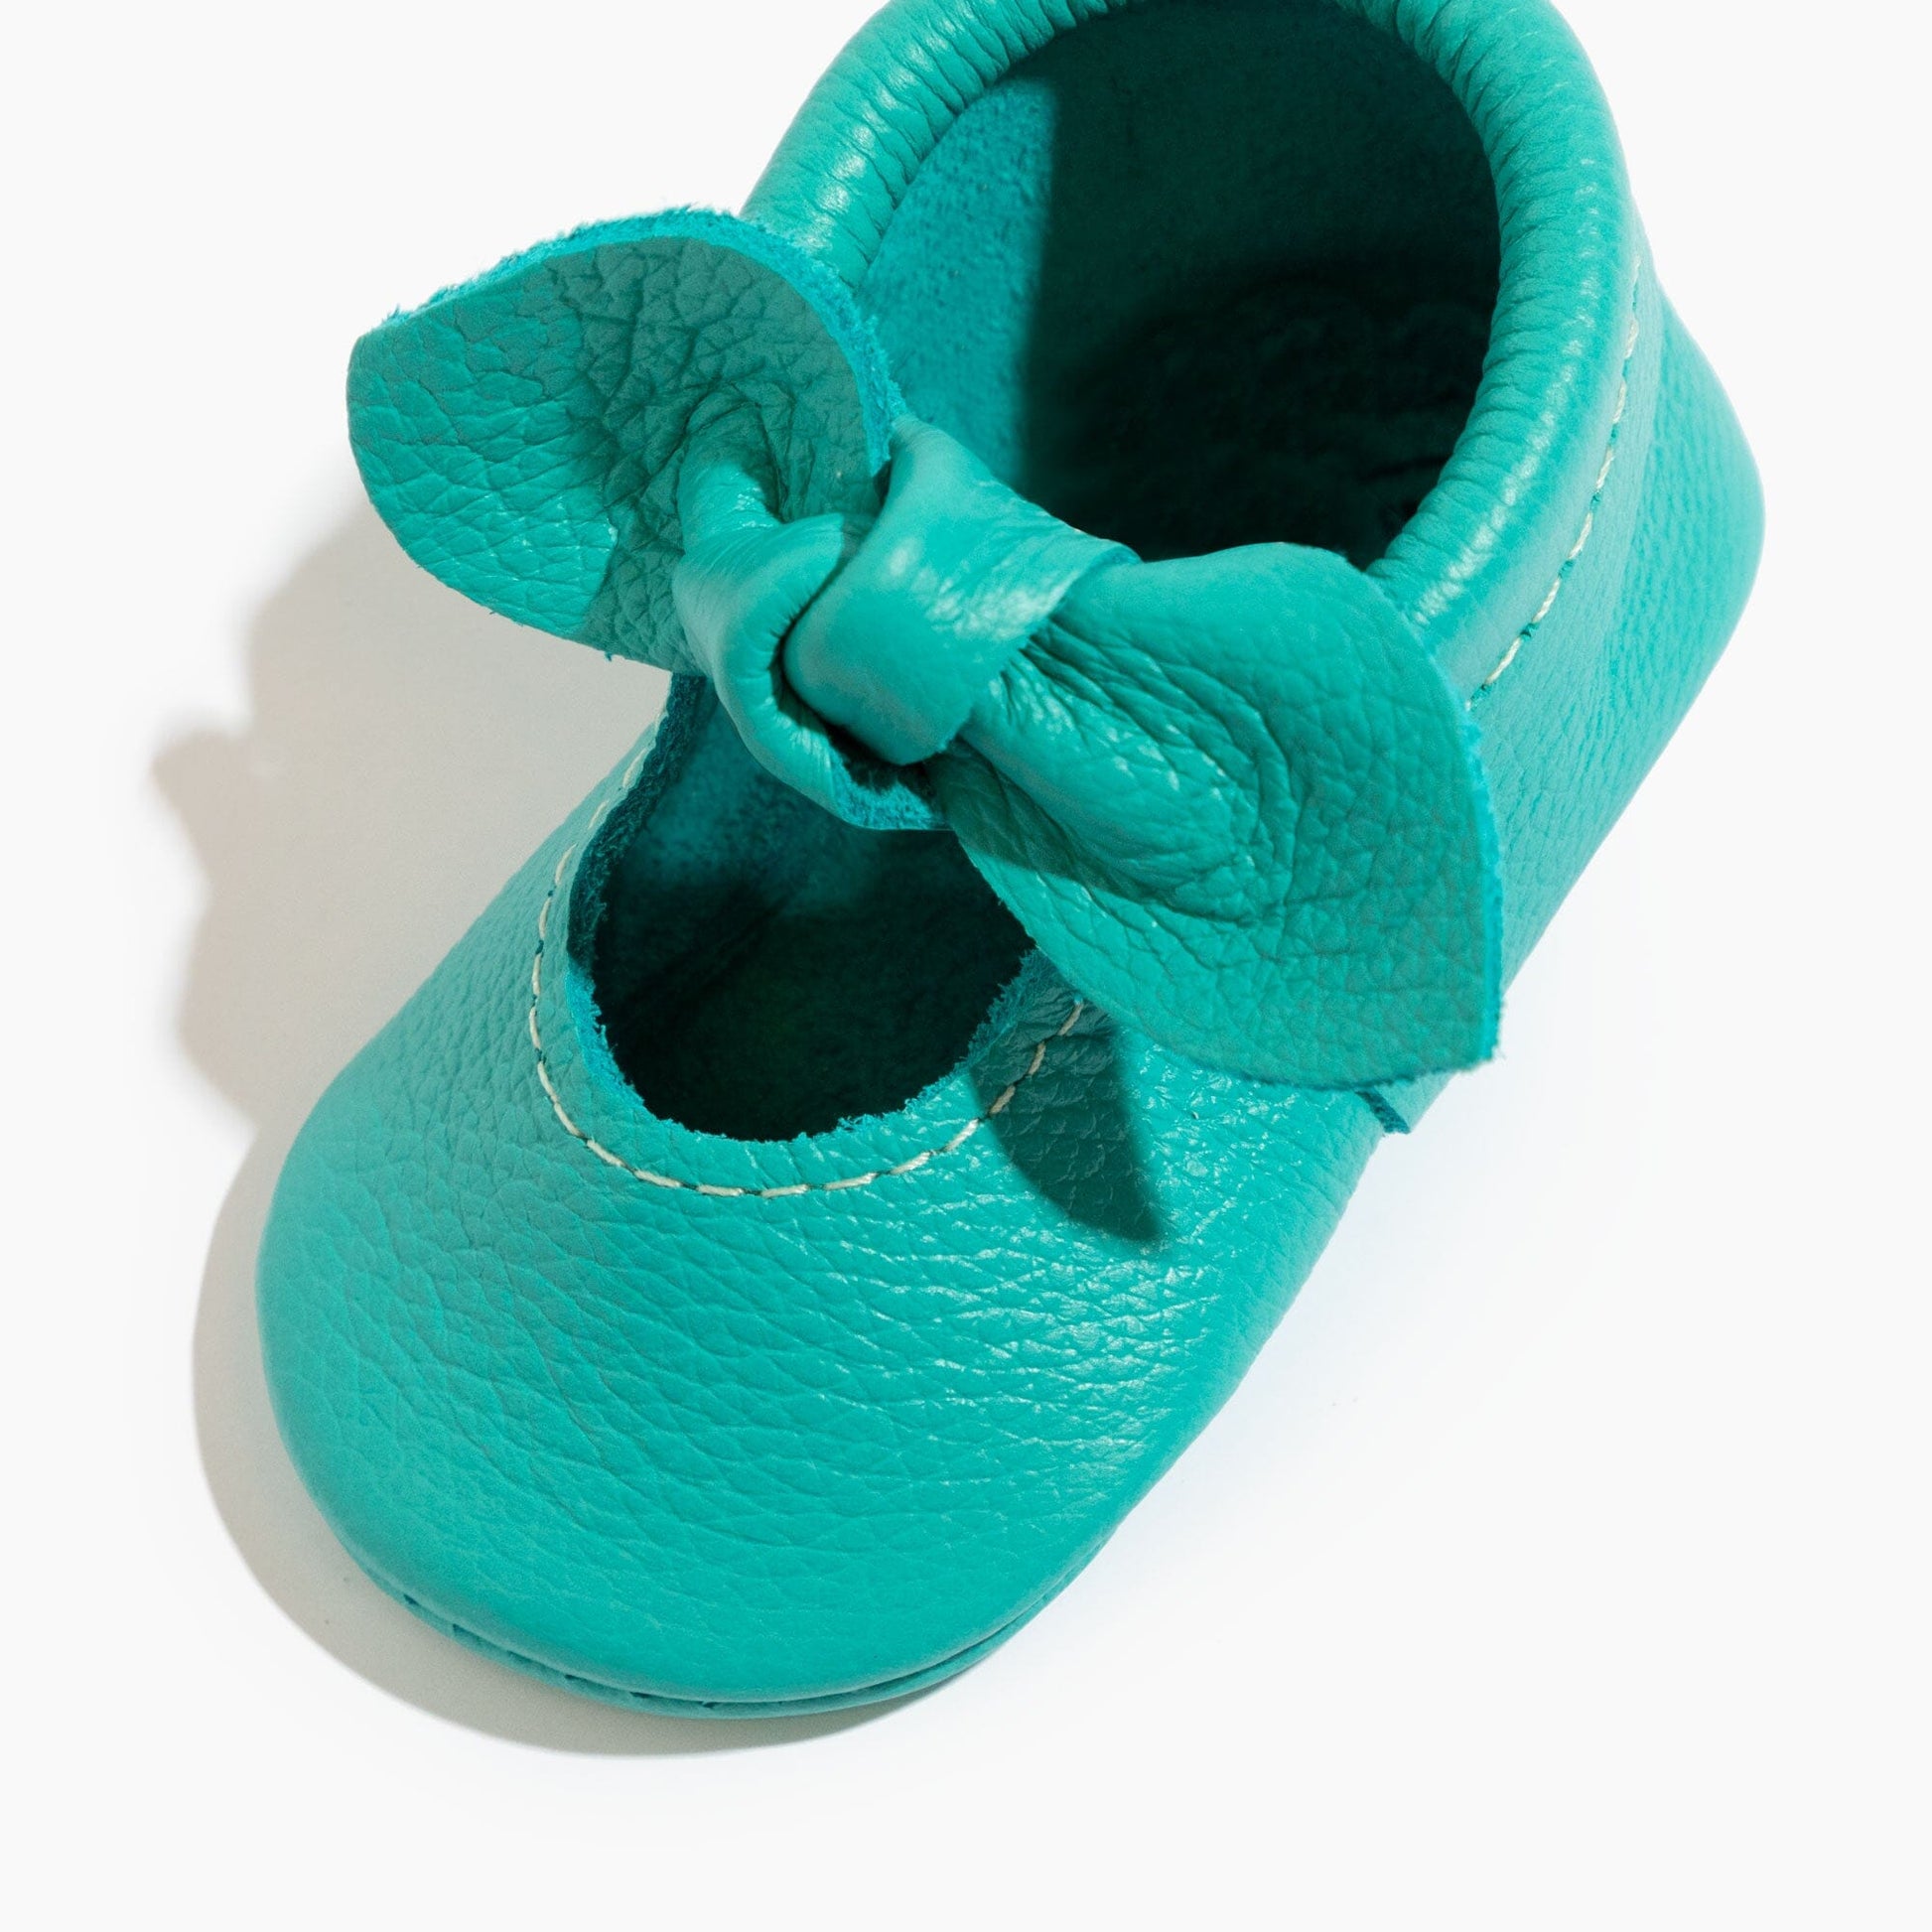 Aqua Knotted Bow Baby Shoe Knotted Bow Mocc Soft Sole 